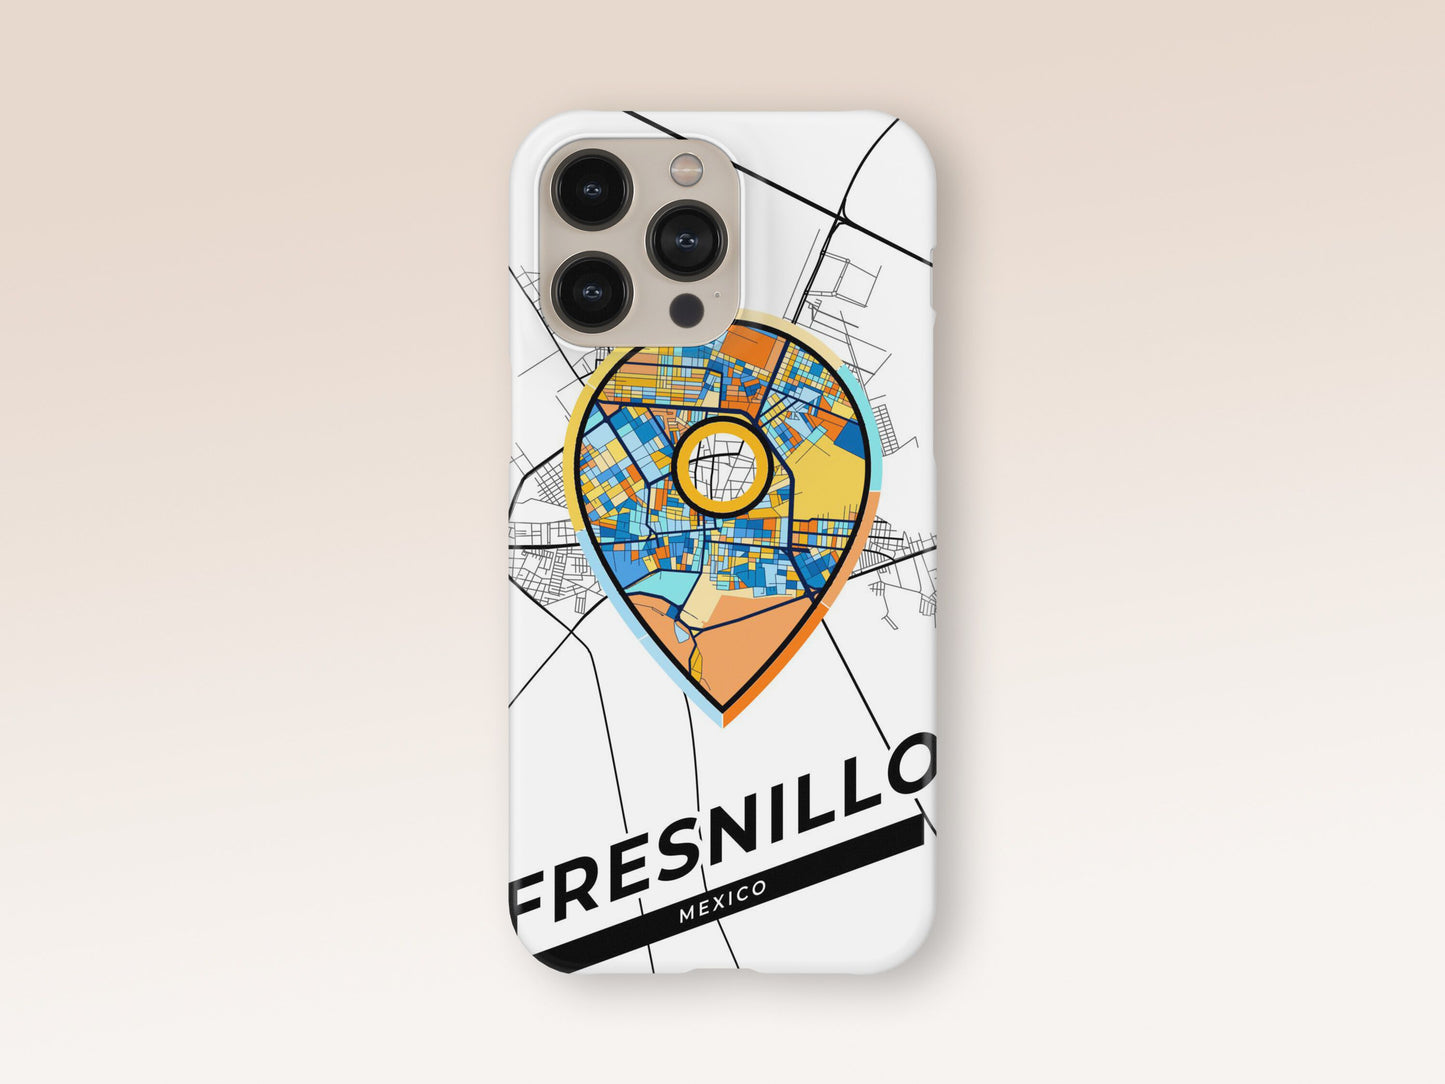 Fresnillo Mexico slim phone case with colorful icon. Birthday, wedding or housewarming gift. Couple match cases. 1